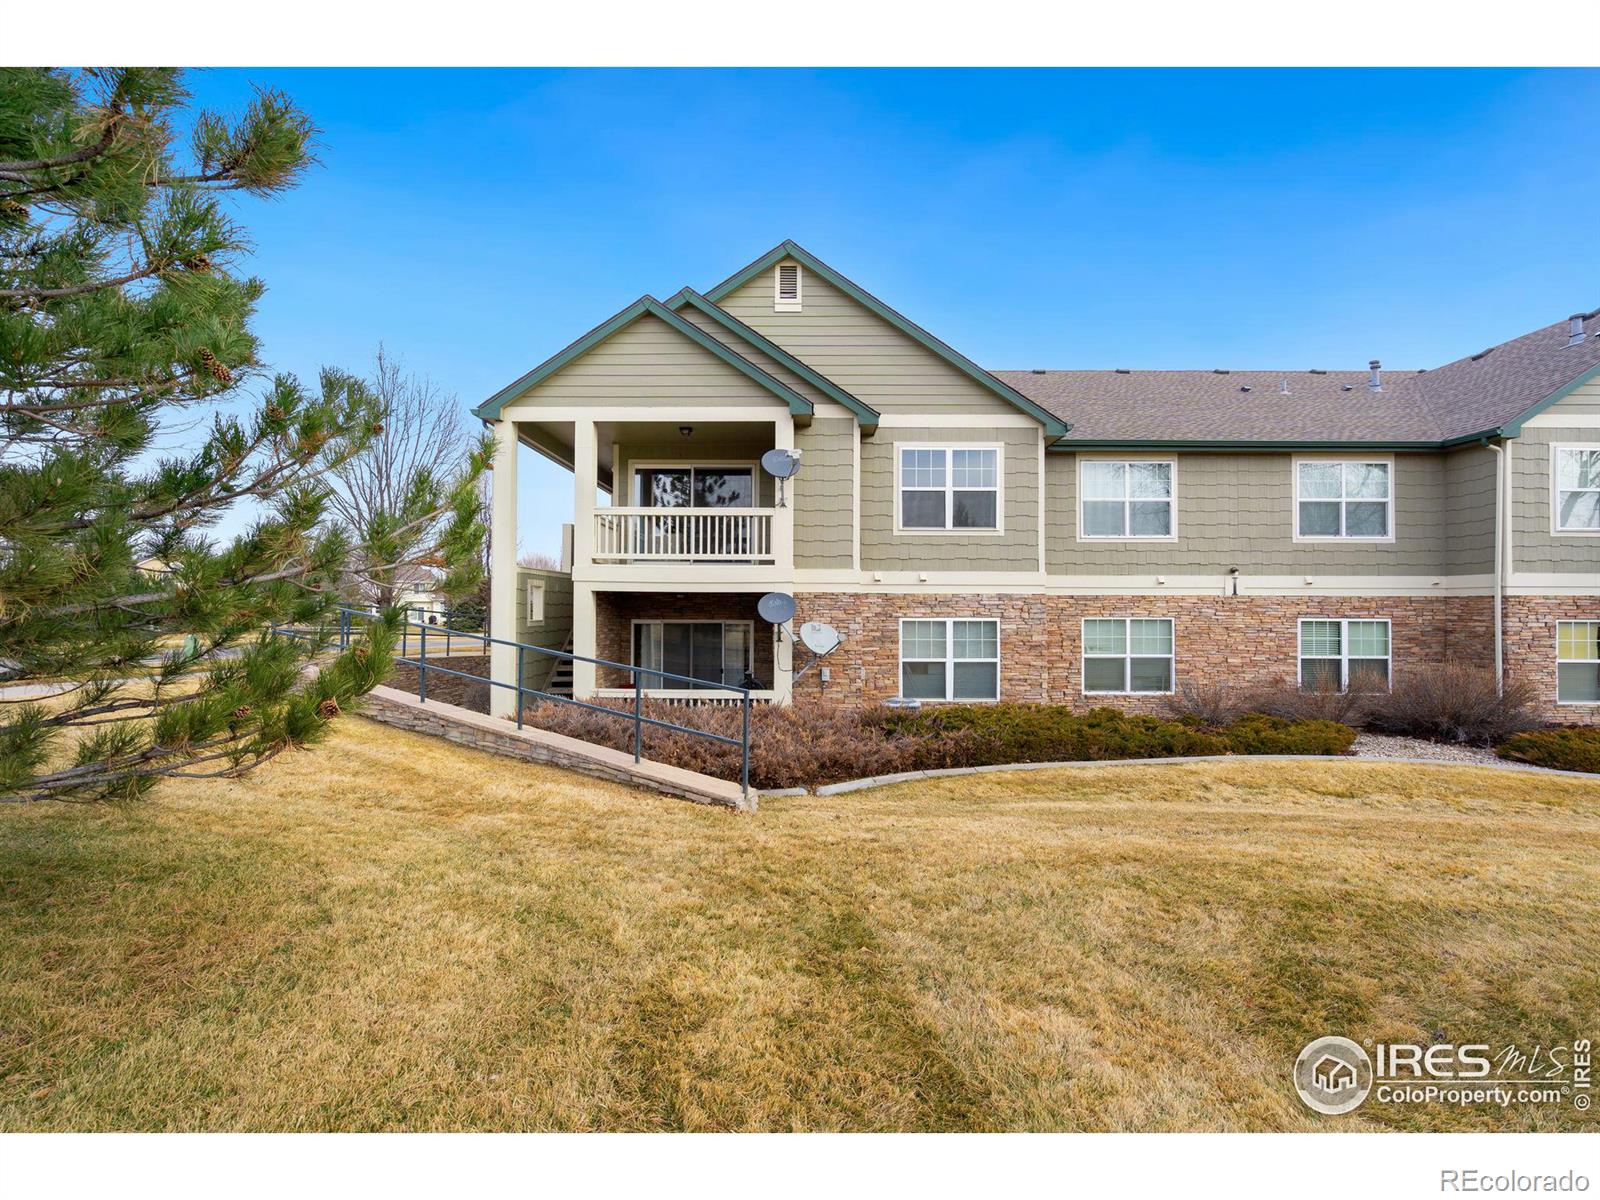 5225  white willow drive, Fort Collins sold home. Closed on 2024-03-19 for $355,000.